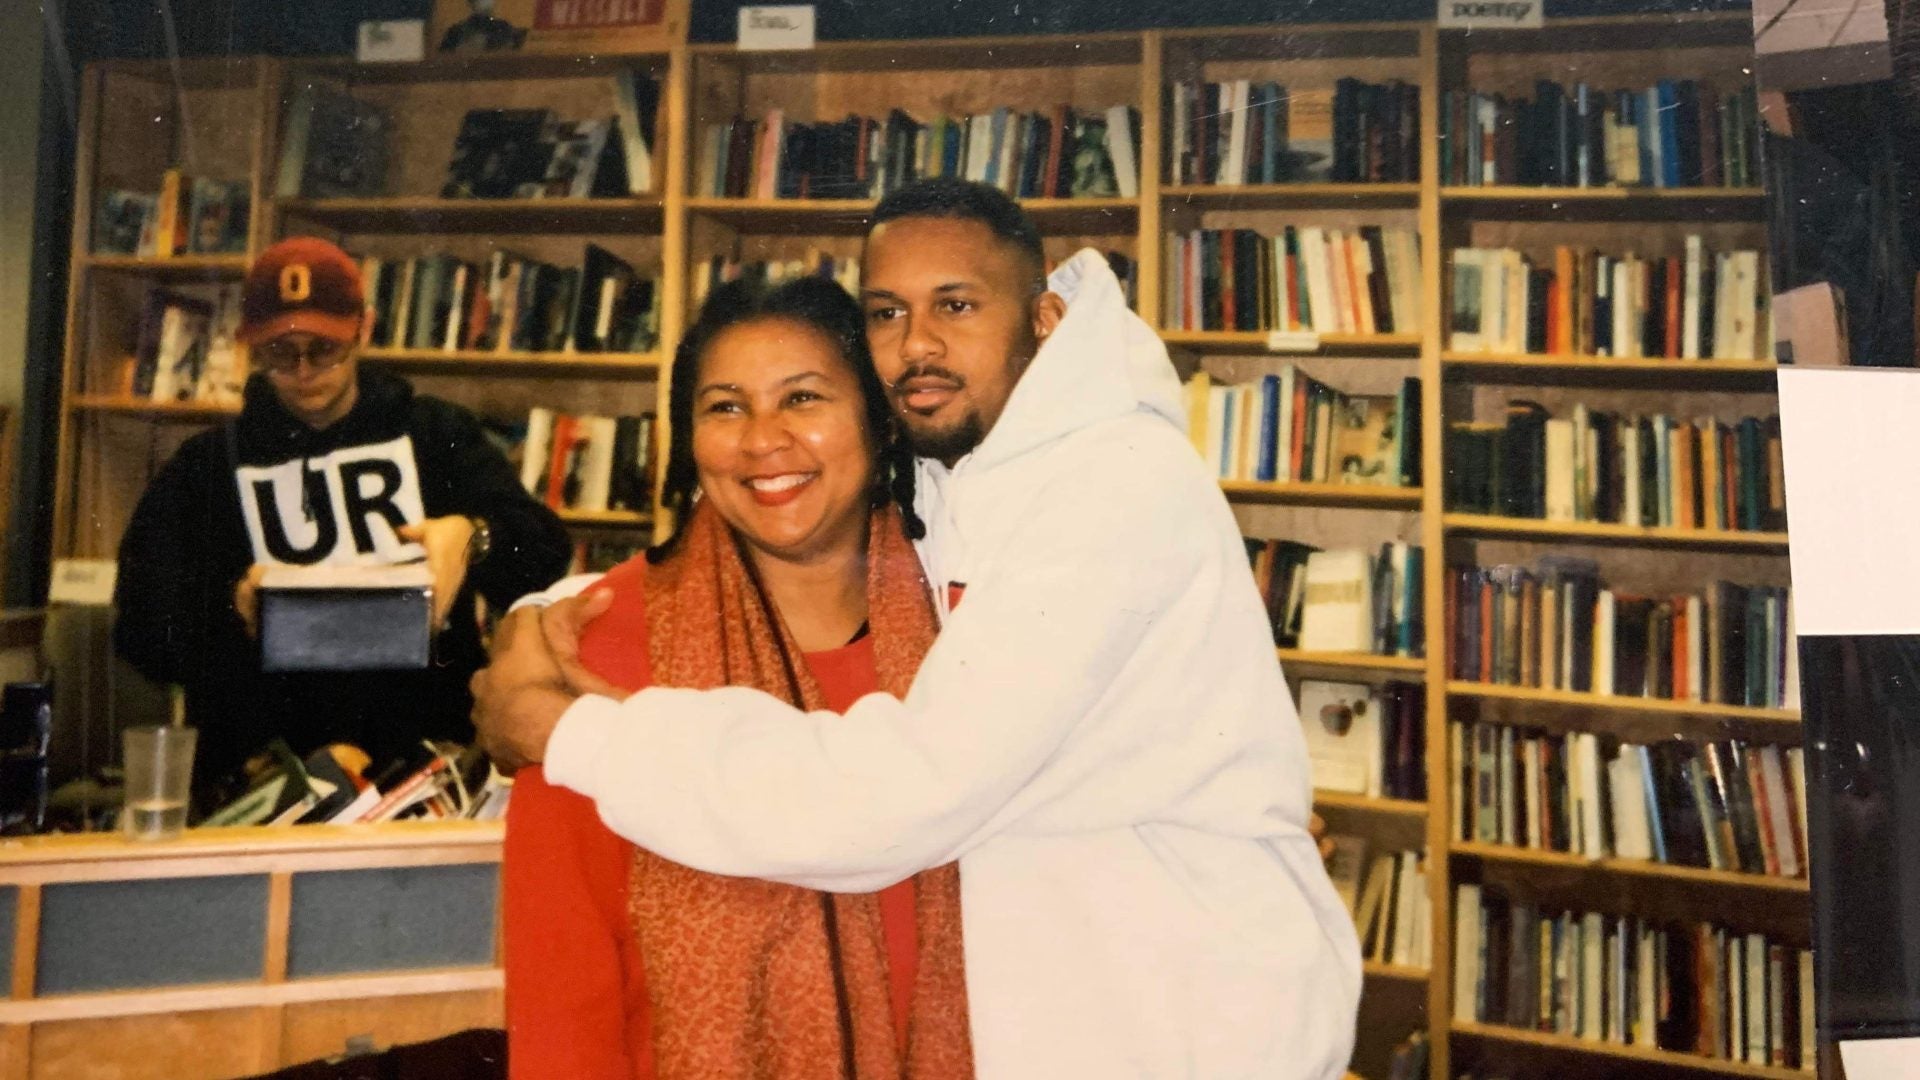 Kevin Powell's Poem "letter to bell hooks" Honors His Late Friend